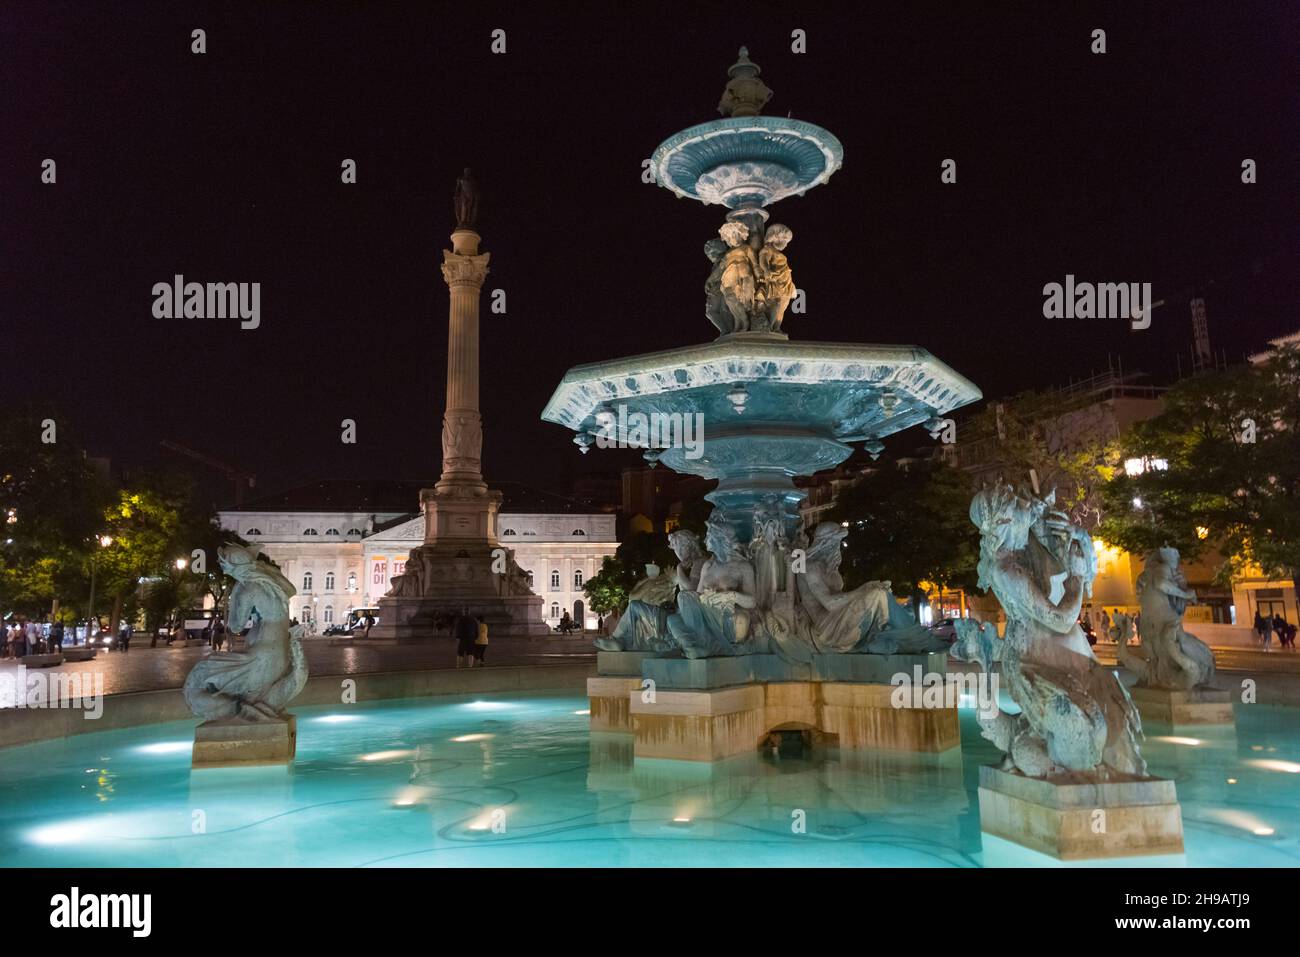 Night view of the Baroque fountain and Column of Pedro IV in the center of Rossio Square, Lisbon, Portugal Stock Photo